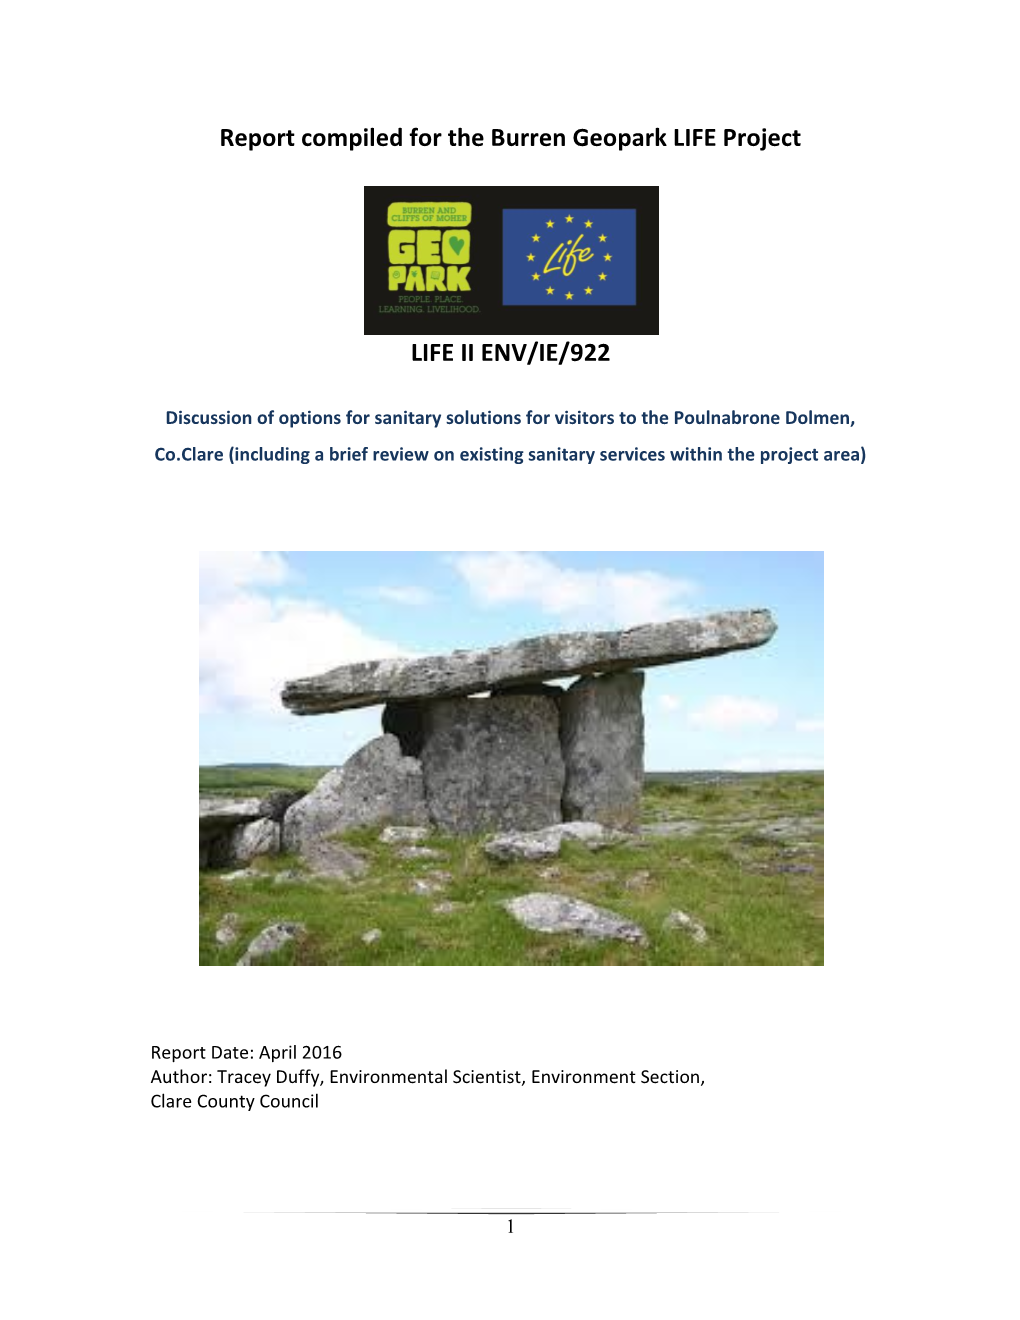 Report Compiled for the Burren Geopark LIFE Project LIFE II ENV/IE/922